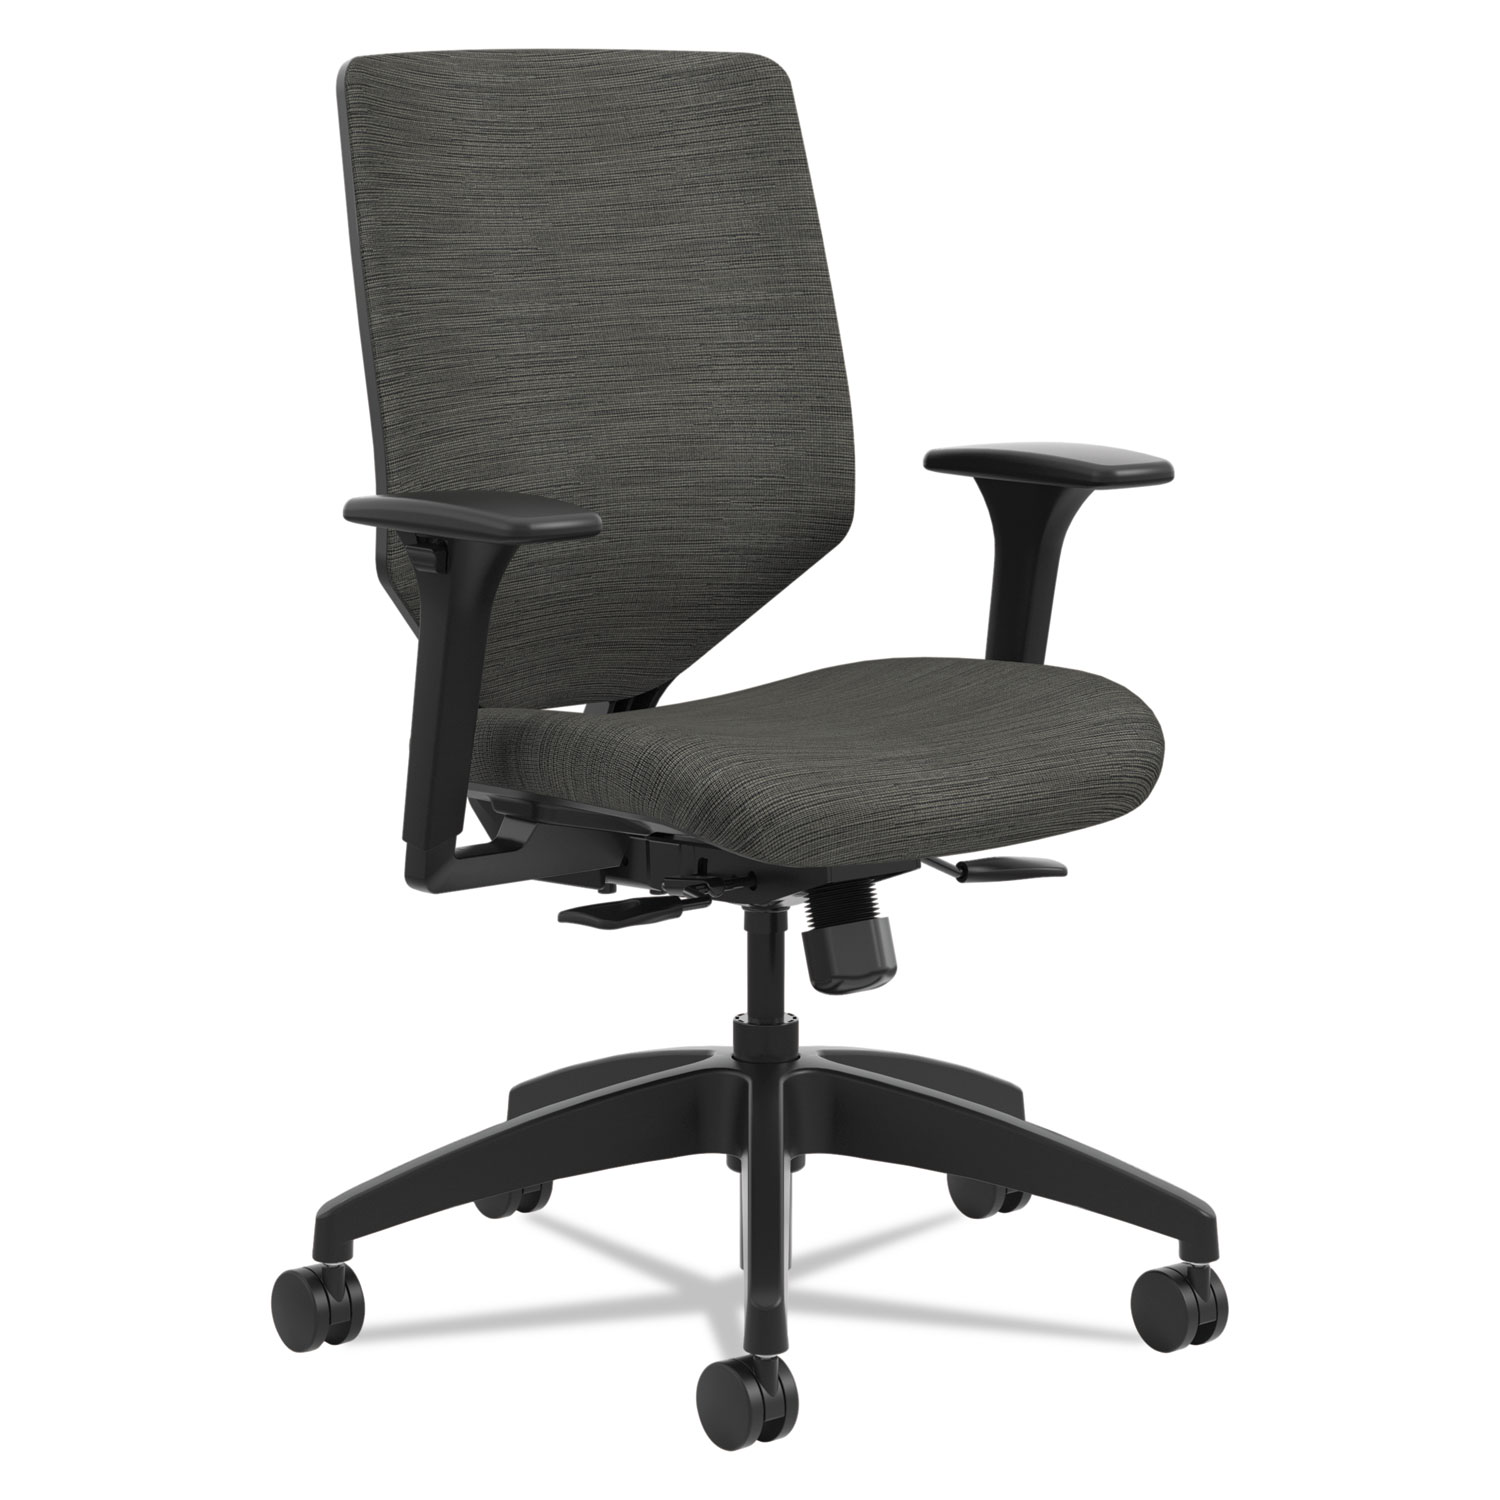  HON SVU1ACLC10TK Solve Series Upholstered Back Task Chair, Supports up to 300 lbs., Ink Seat/Ink Back, Black Base (HONSVU1ACLC10TK) 